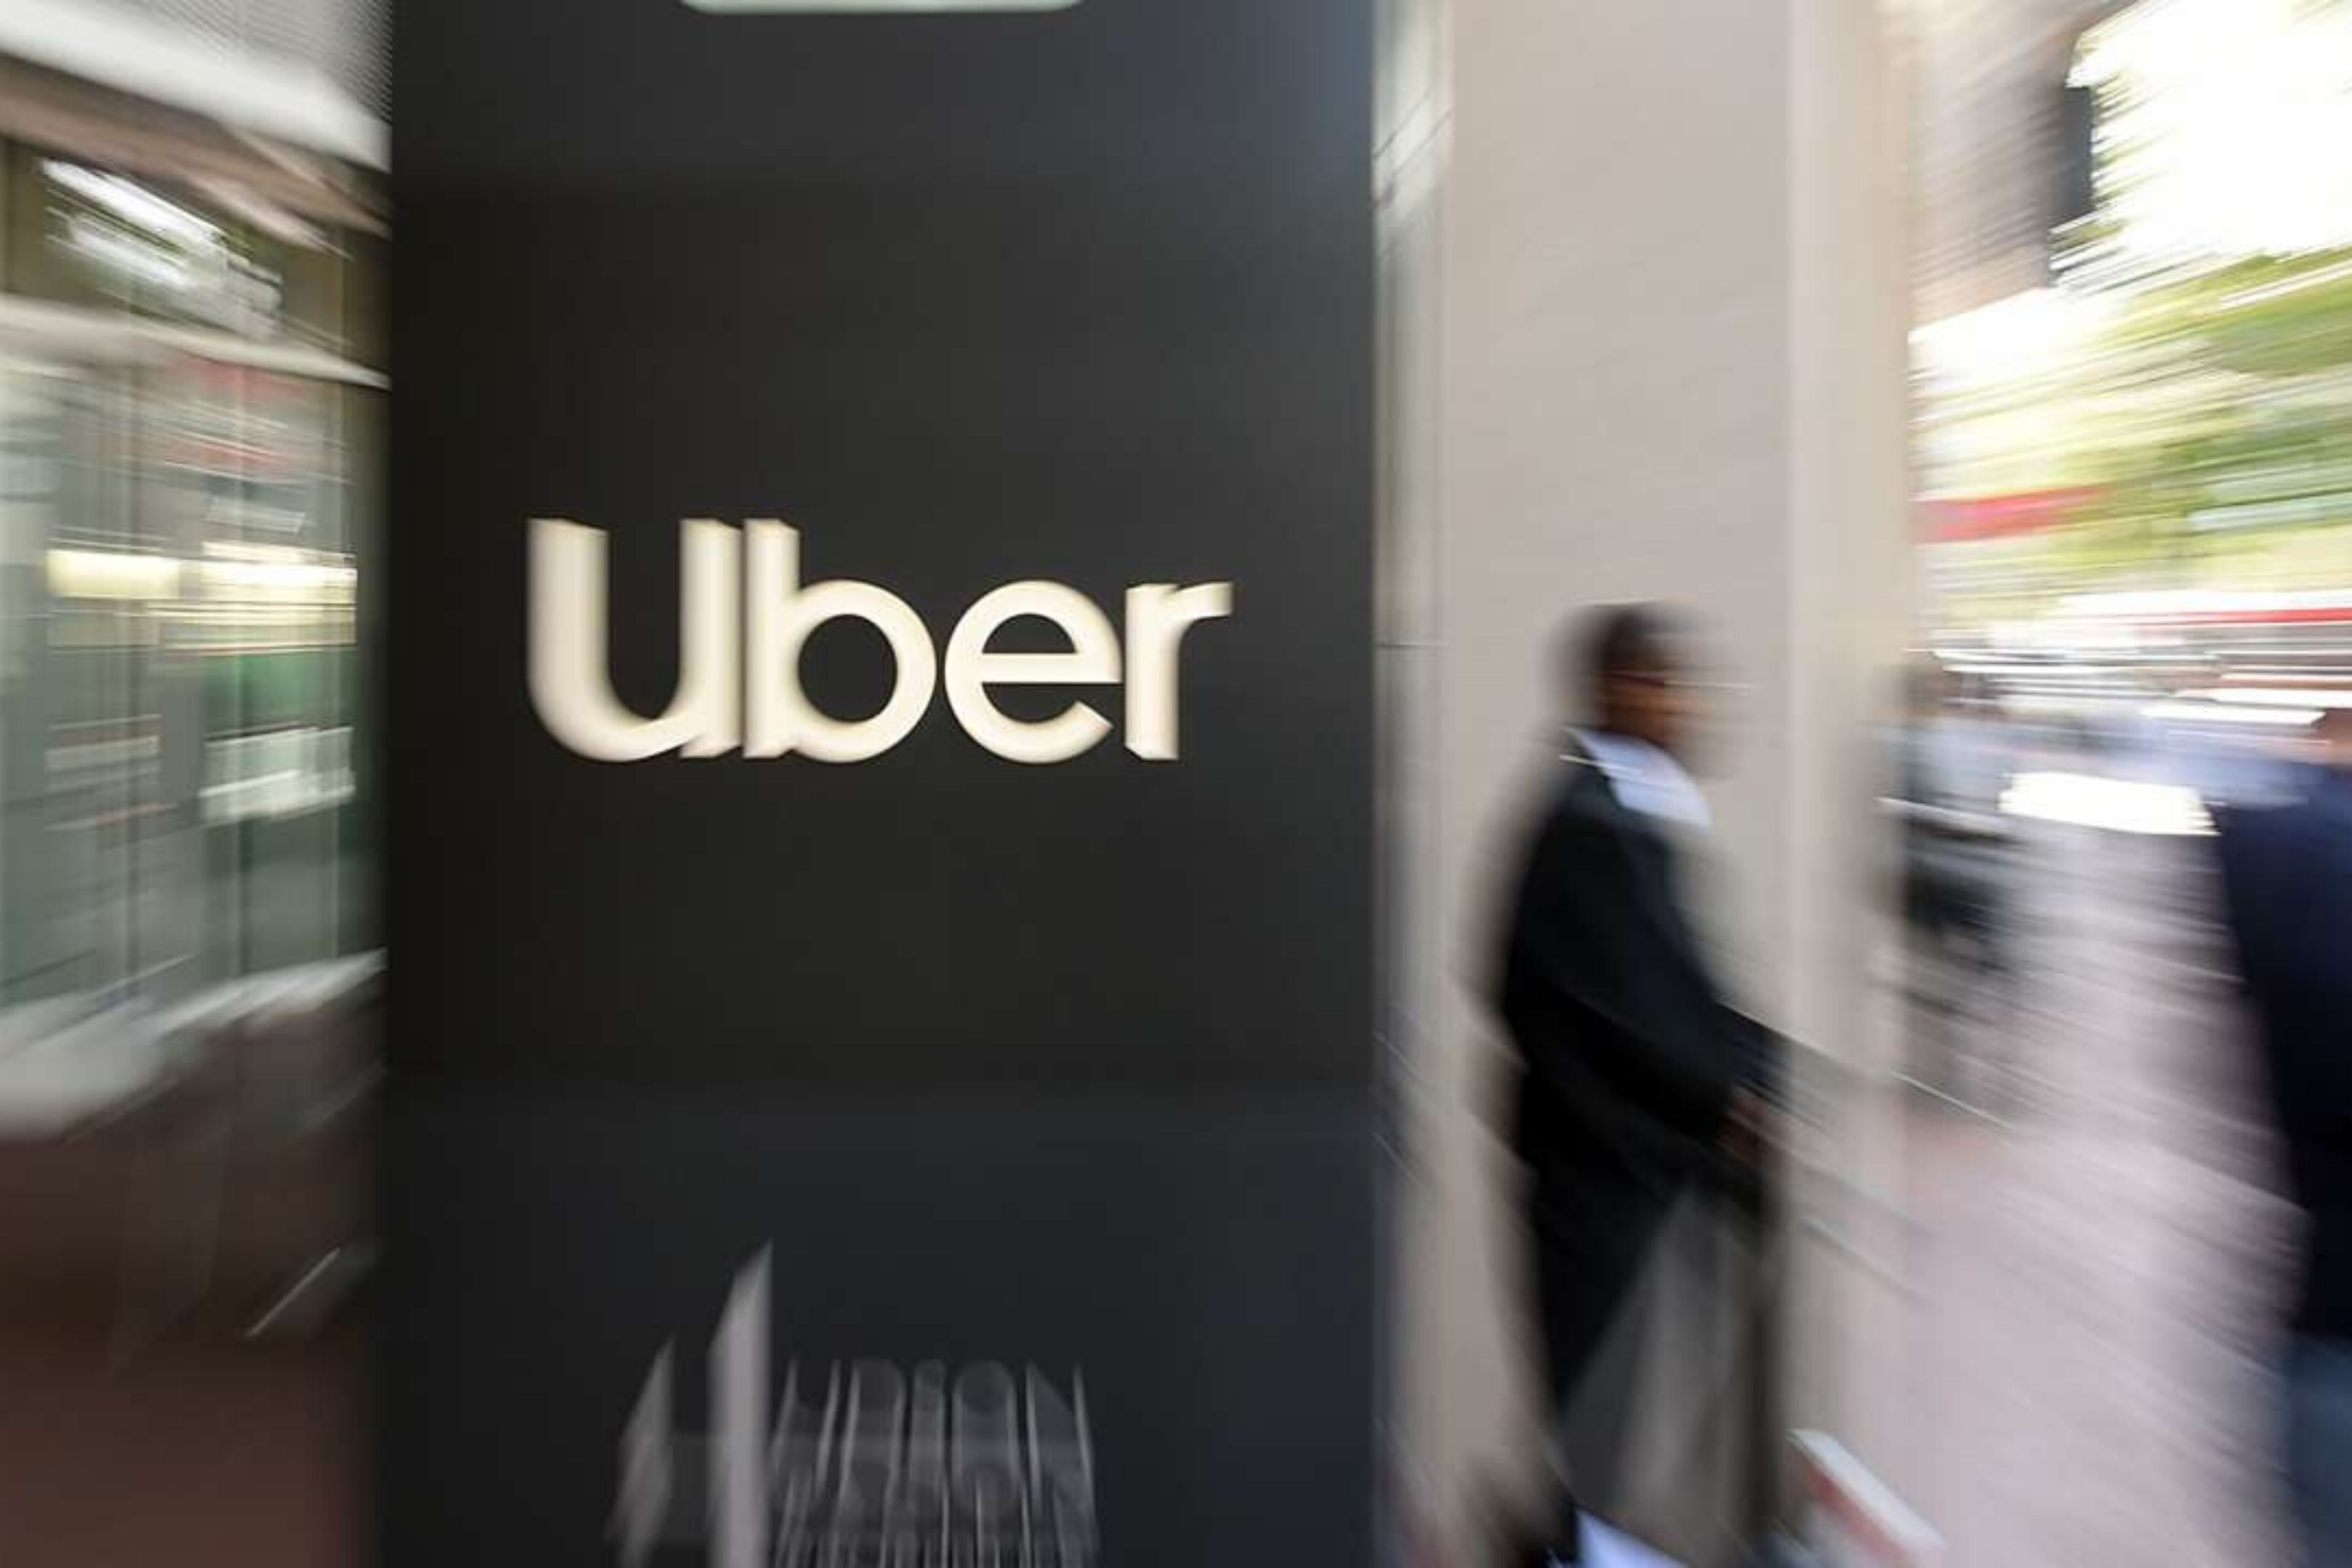 Uber fires 3,500 people by videoconference